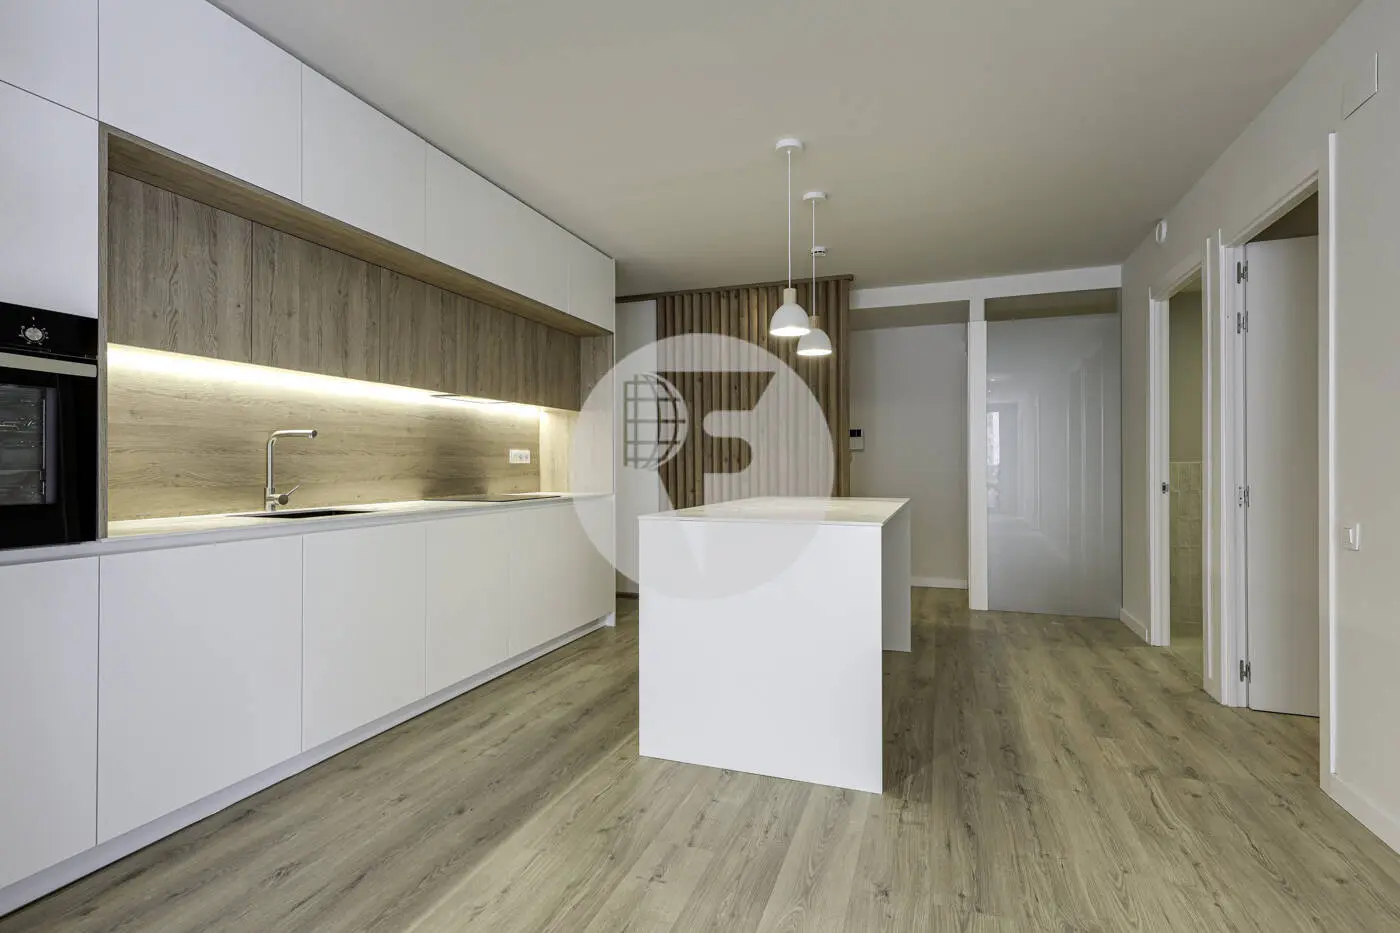 Apartment with three bedrooms and 2 bathrooms completely renovated, brand new 7